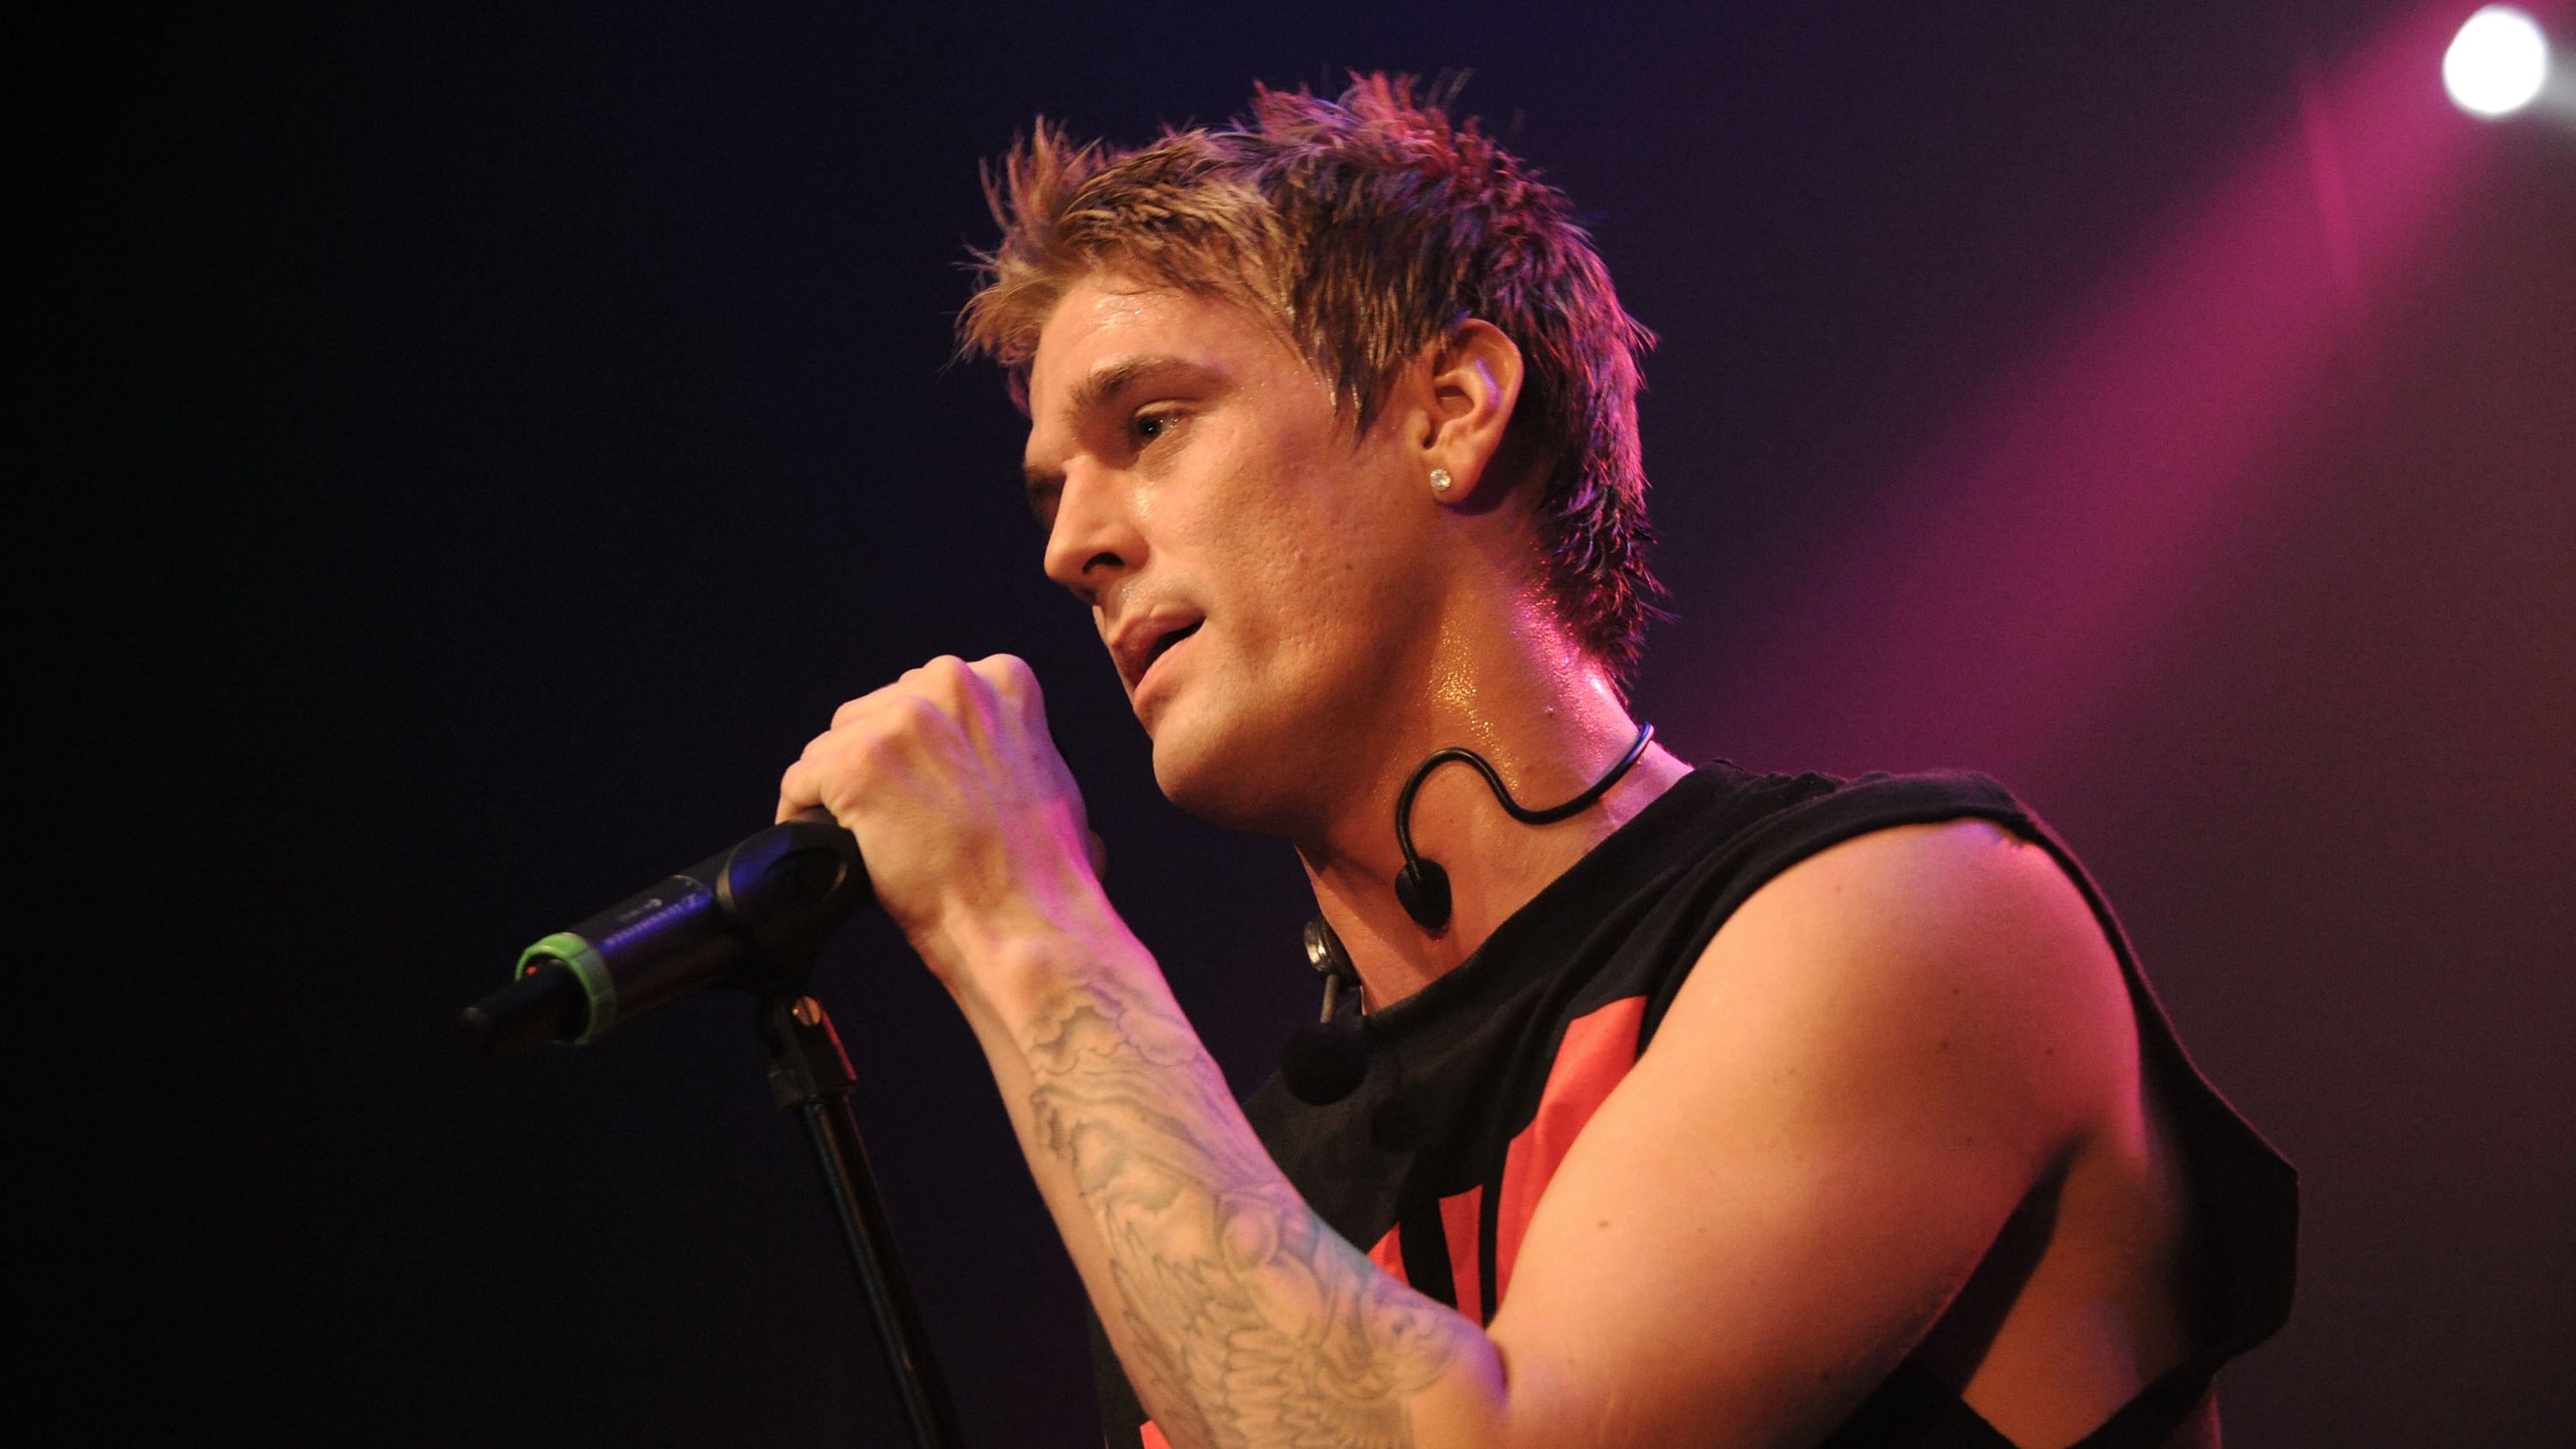 <a href="https://www.cnn.com/2022/11/05/entertainment/aaron-carter-obit" target="_blank">Aaron Carter,</a> a former child pop singer and younger brother of the Backstreet Boys' Nick Carter, died, a source close to the family told CNN on November 5. He was 34. Authorities gave no information about a possible cause of death.